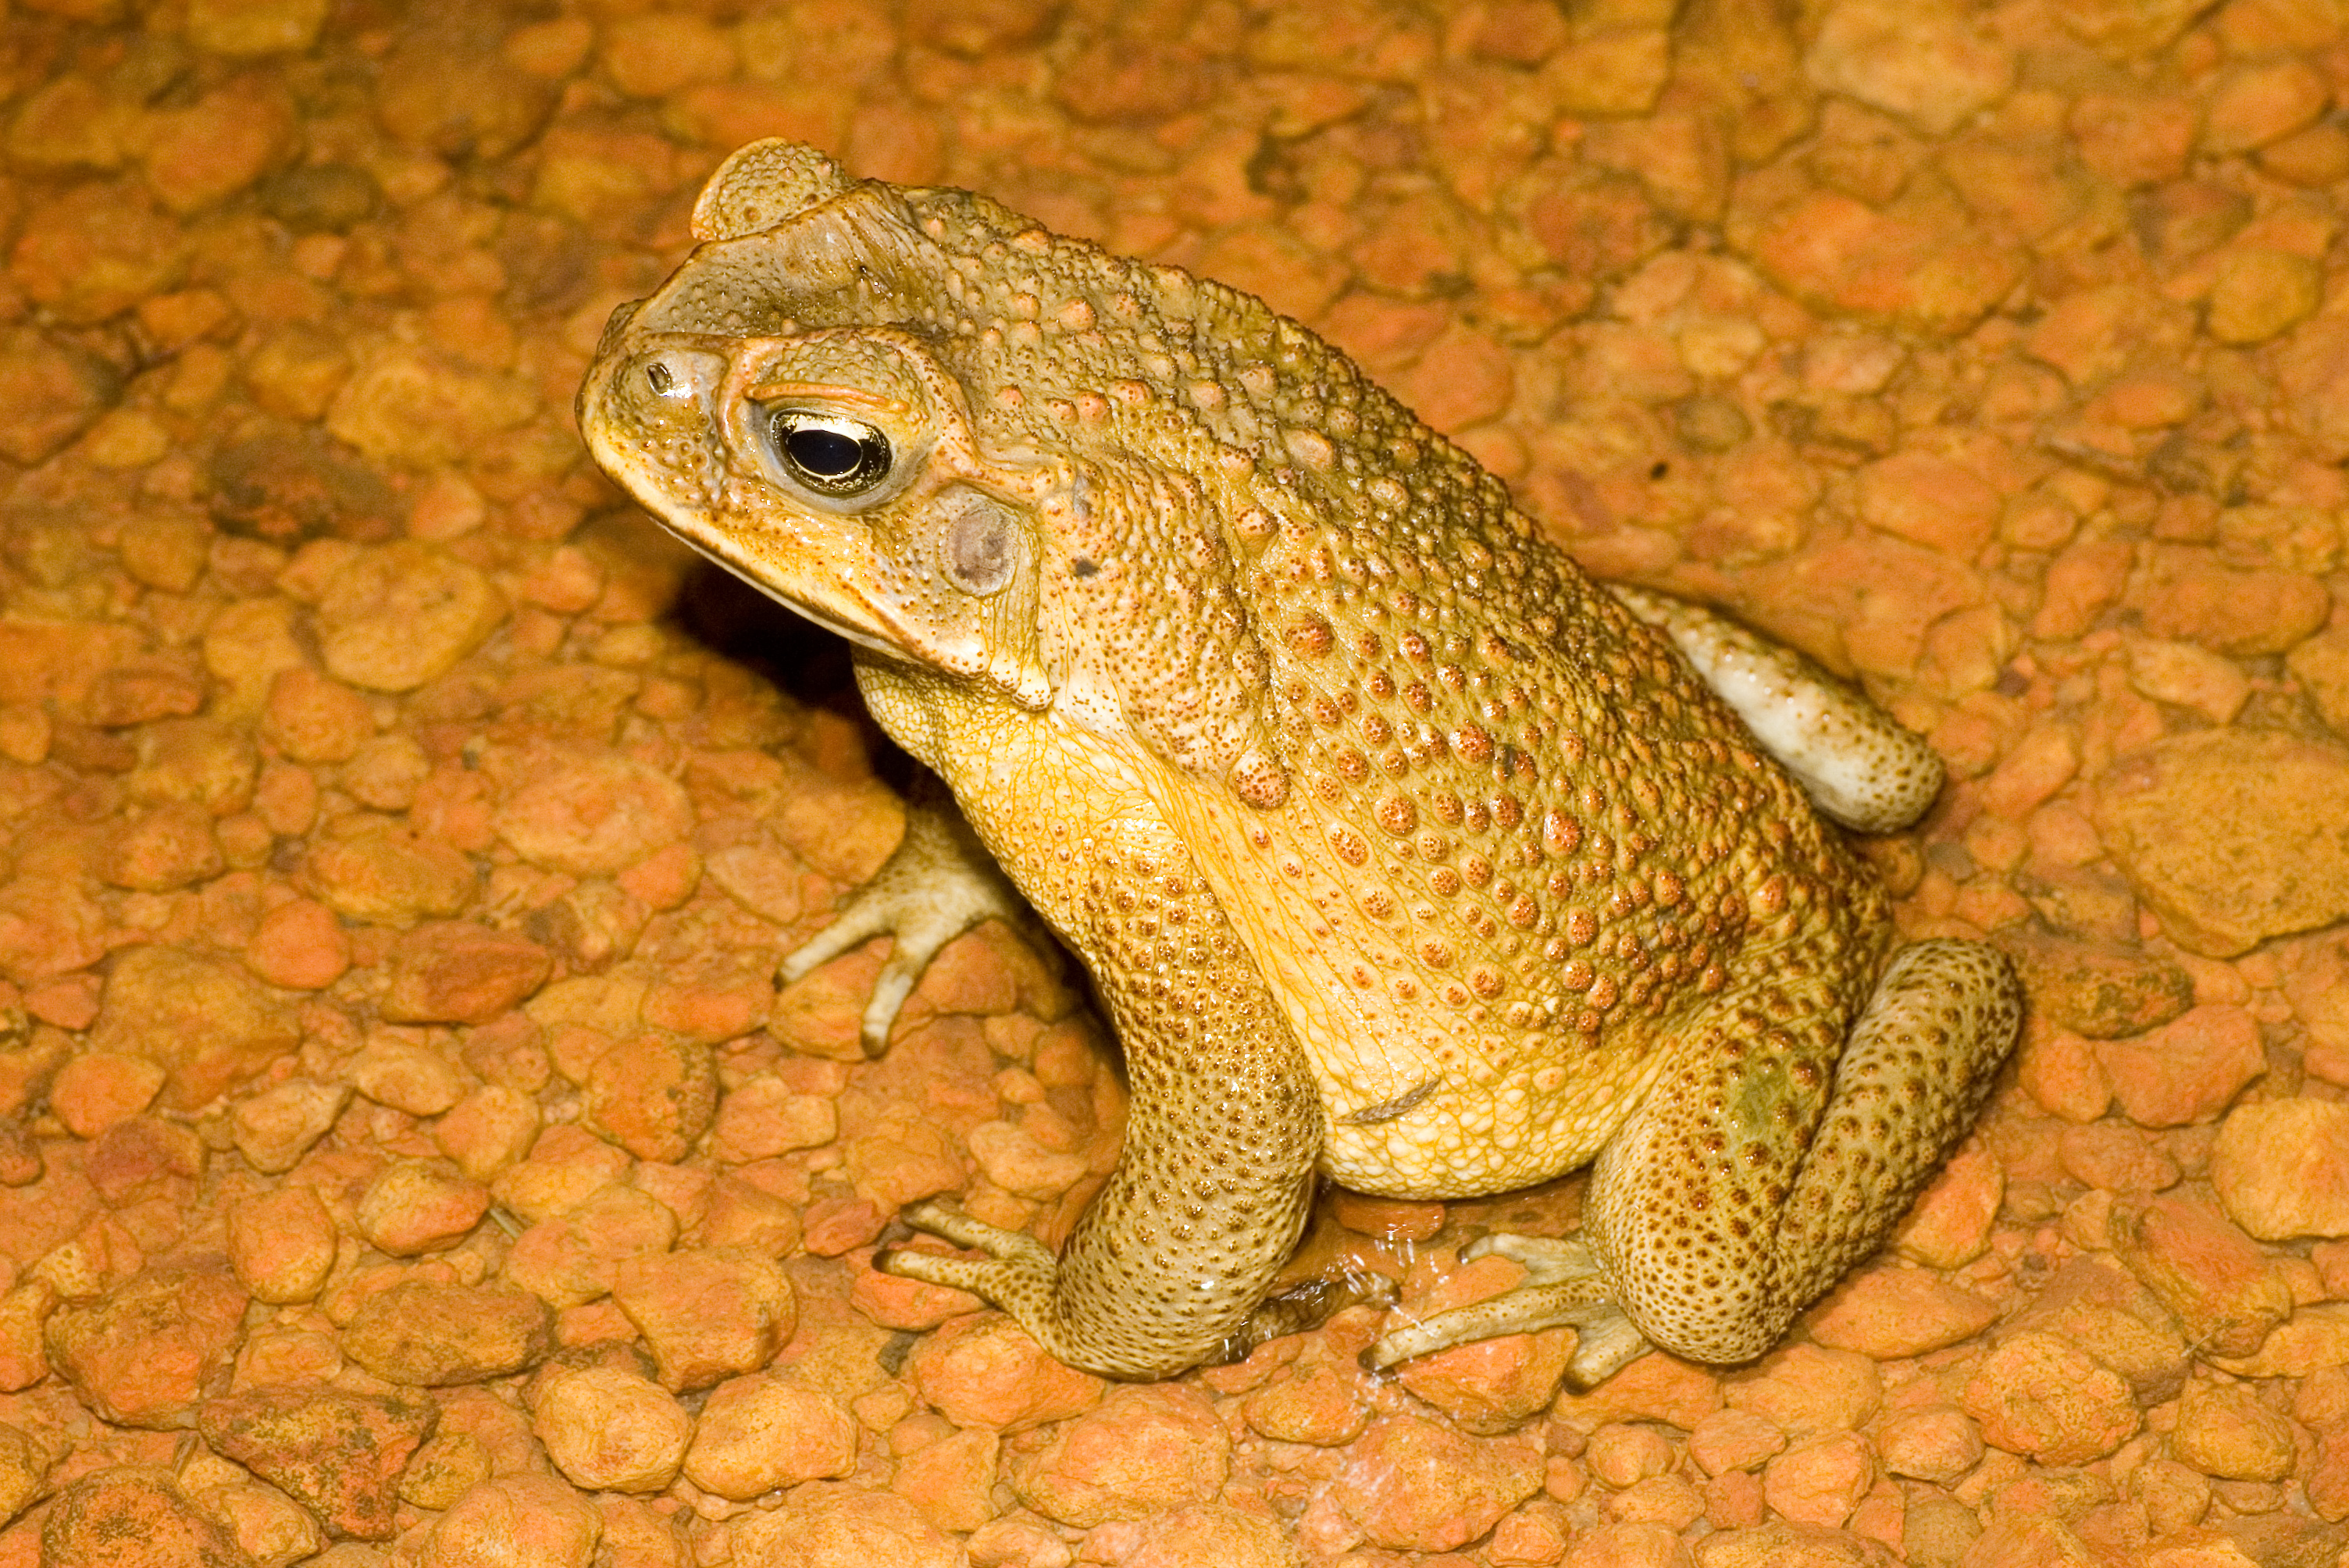 Male cane toad. Photo: David Nelson